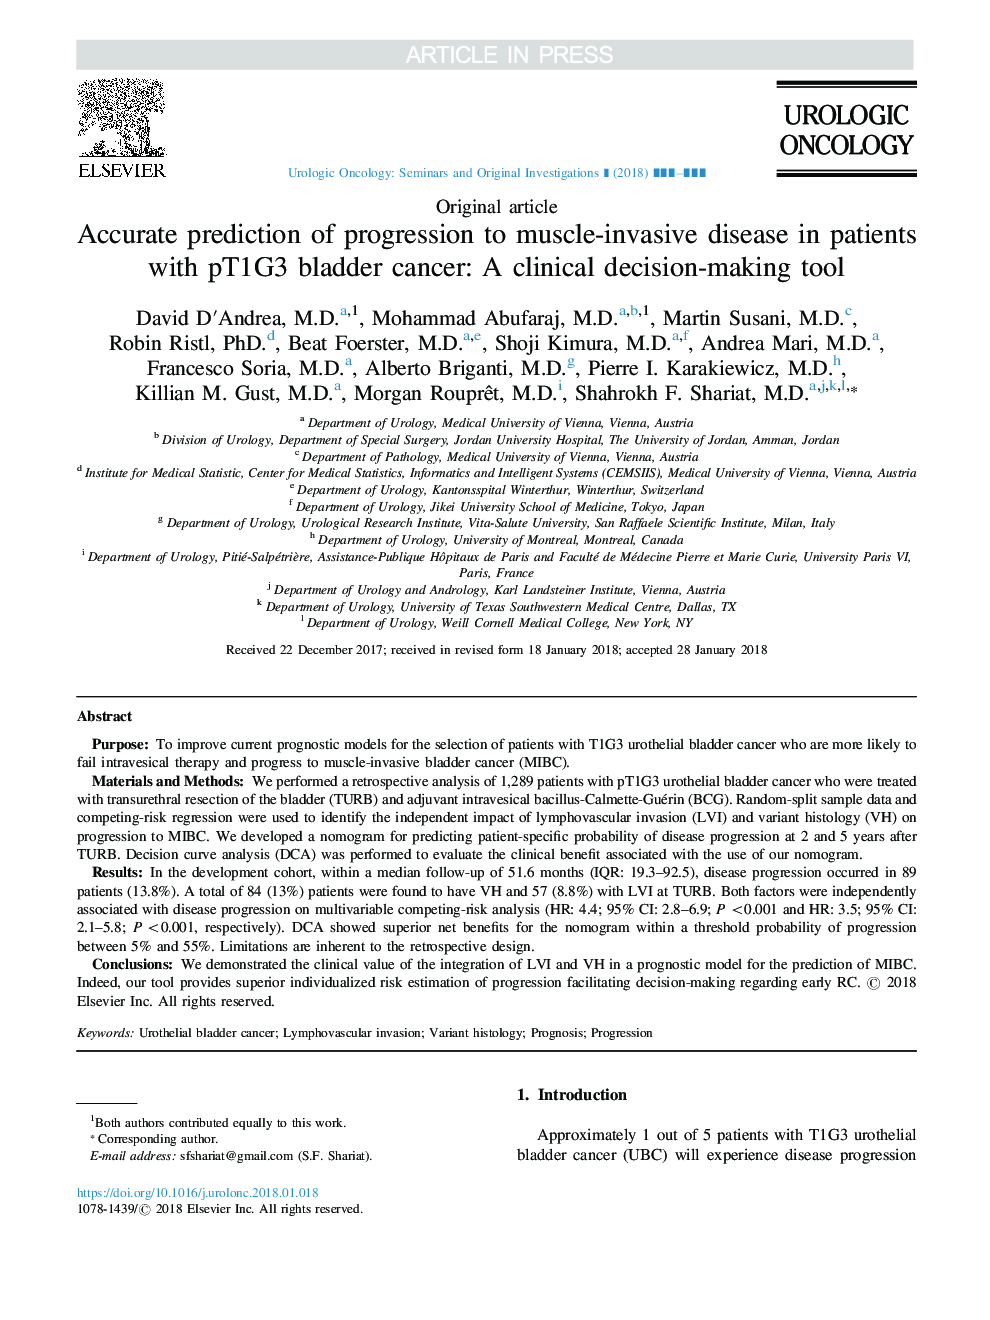 Accurate prediction of progression to muscle-invasive disease in patients with pT1G3 bladder cancer: A clinical decision-making tool